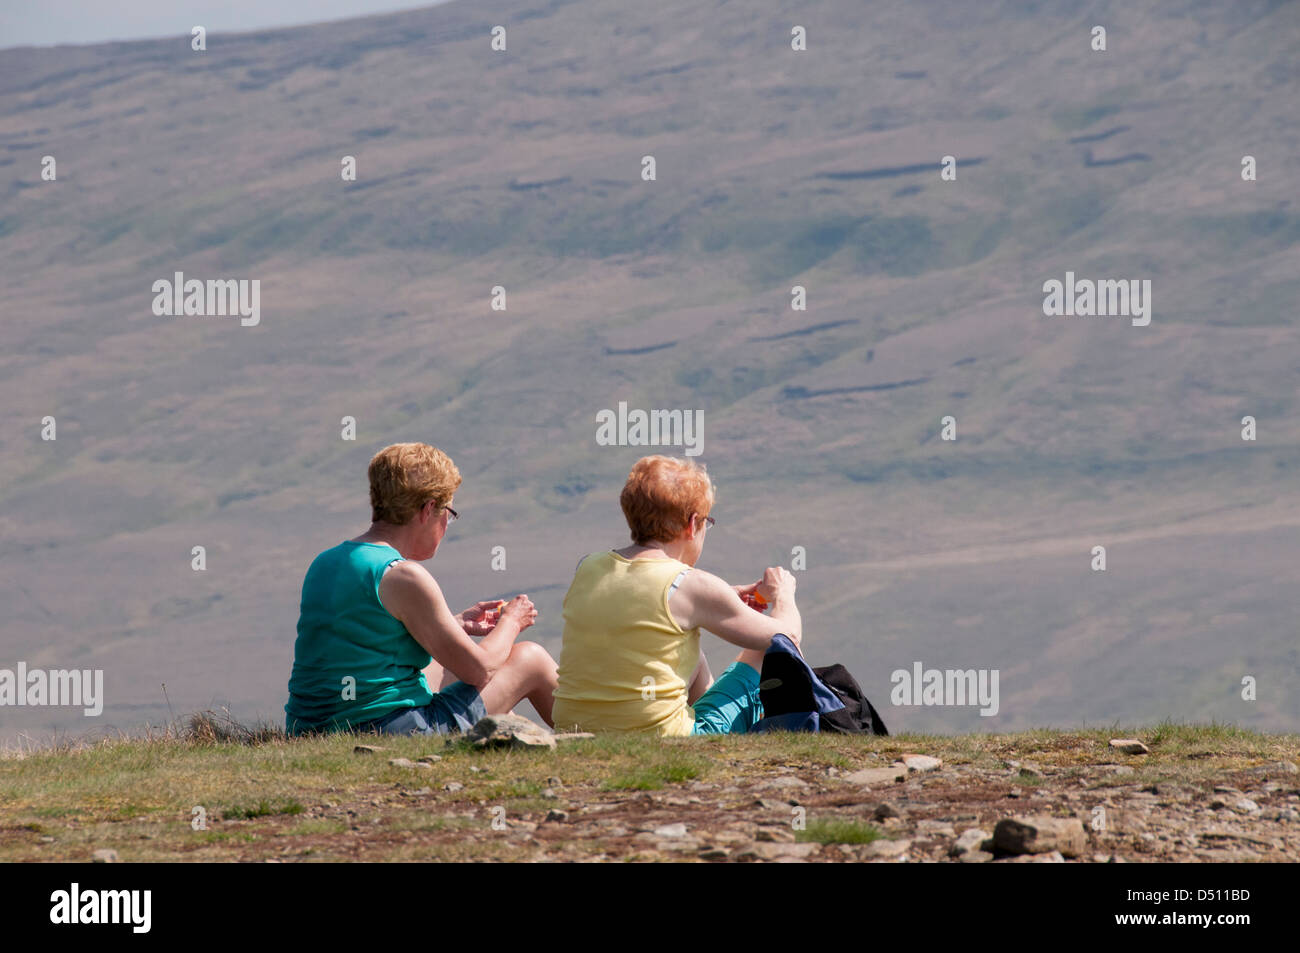 Rear view of 2 women or females (walkers) sitting on sunny summit of Pen-y-ghent, eating picnic, steep fellside beyond - Yorkshire Dales, England, UK. Stock Photo